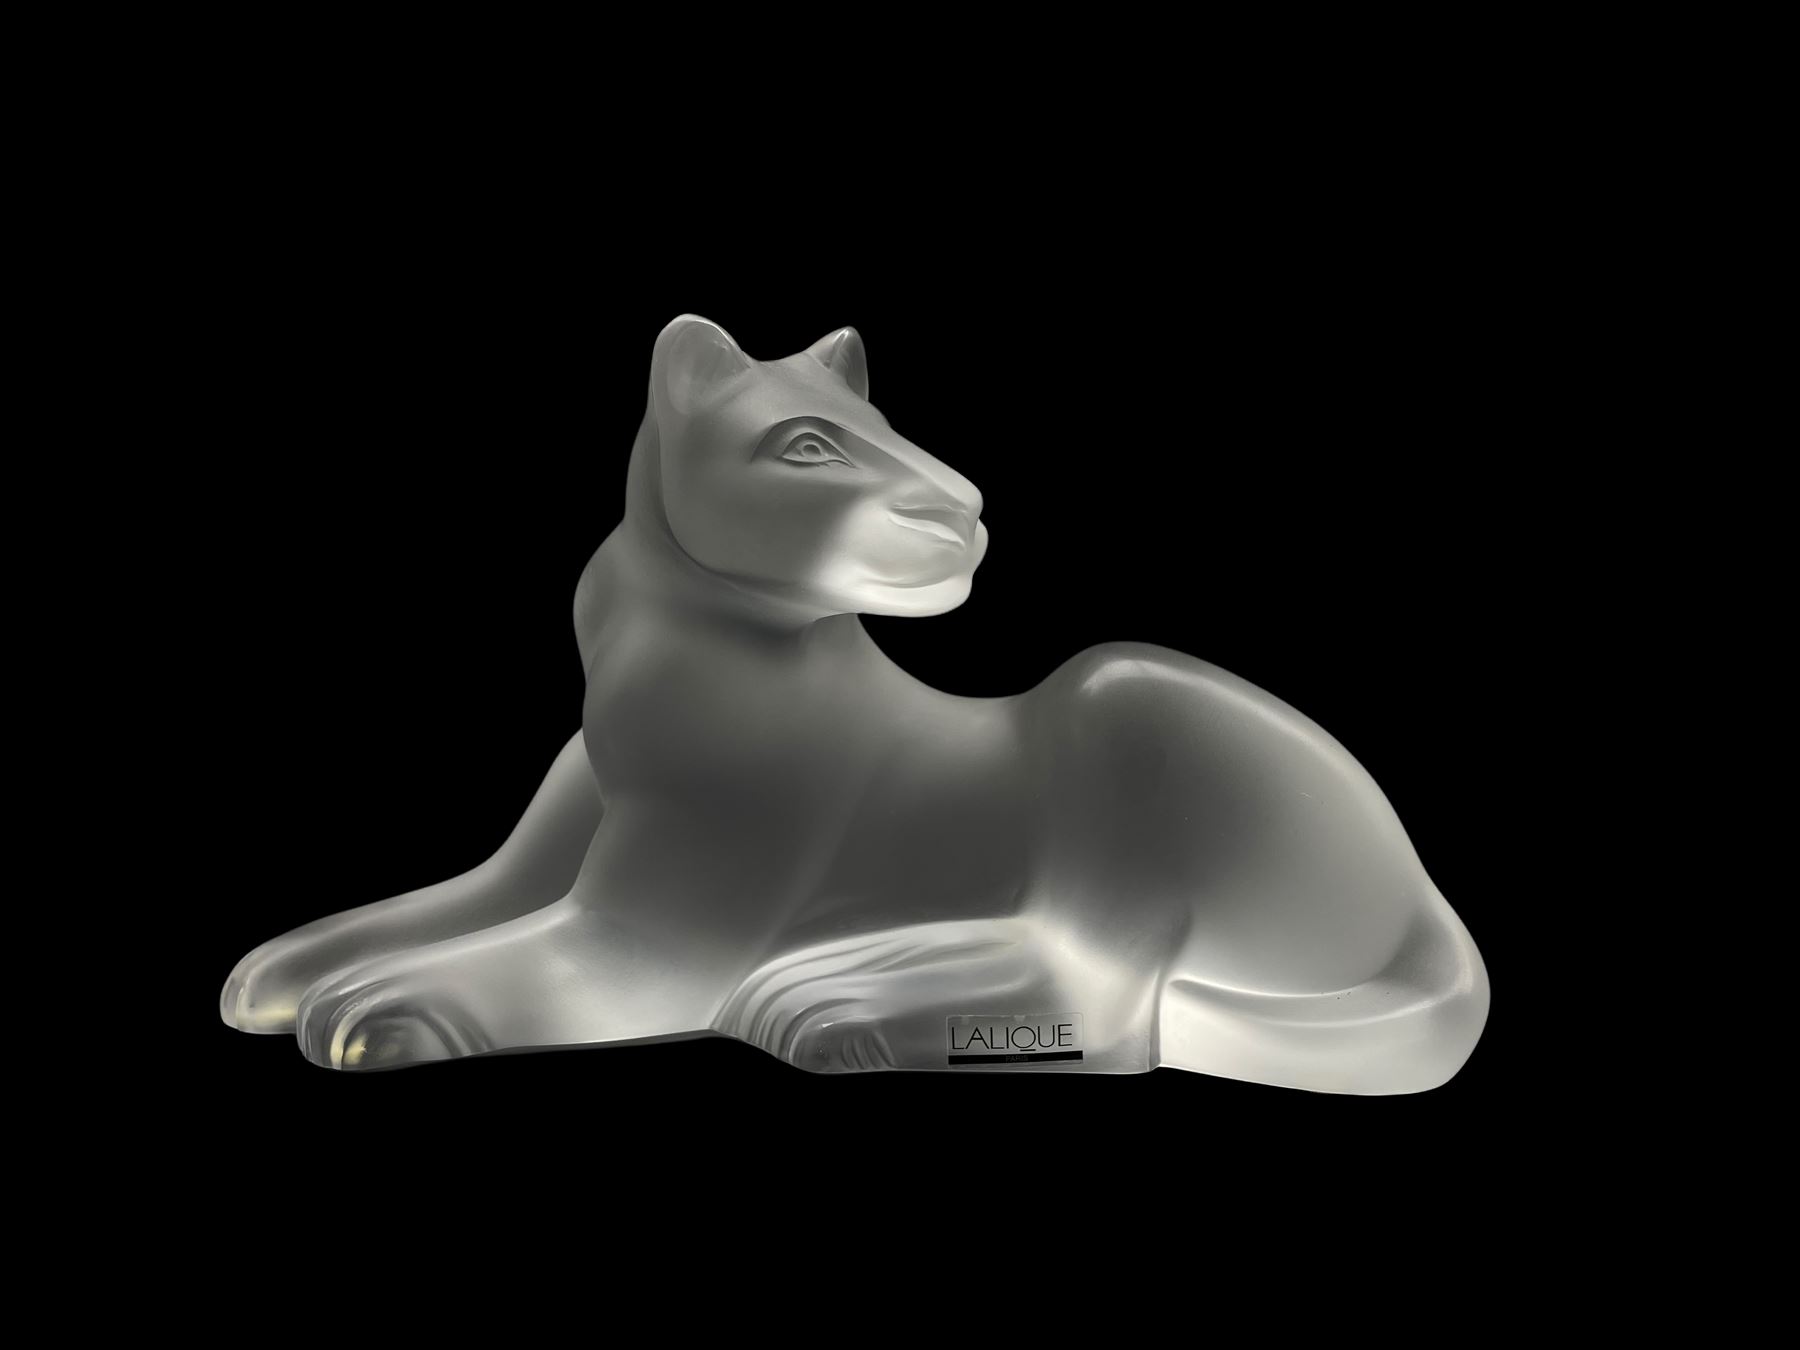 Lalique frosted glass model of a recumbent Lioness